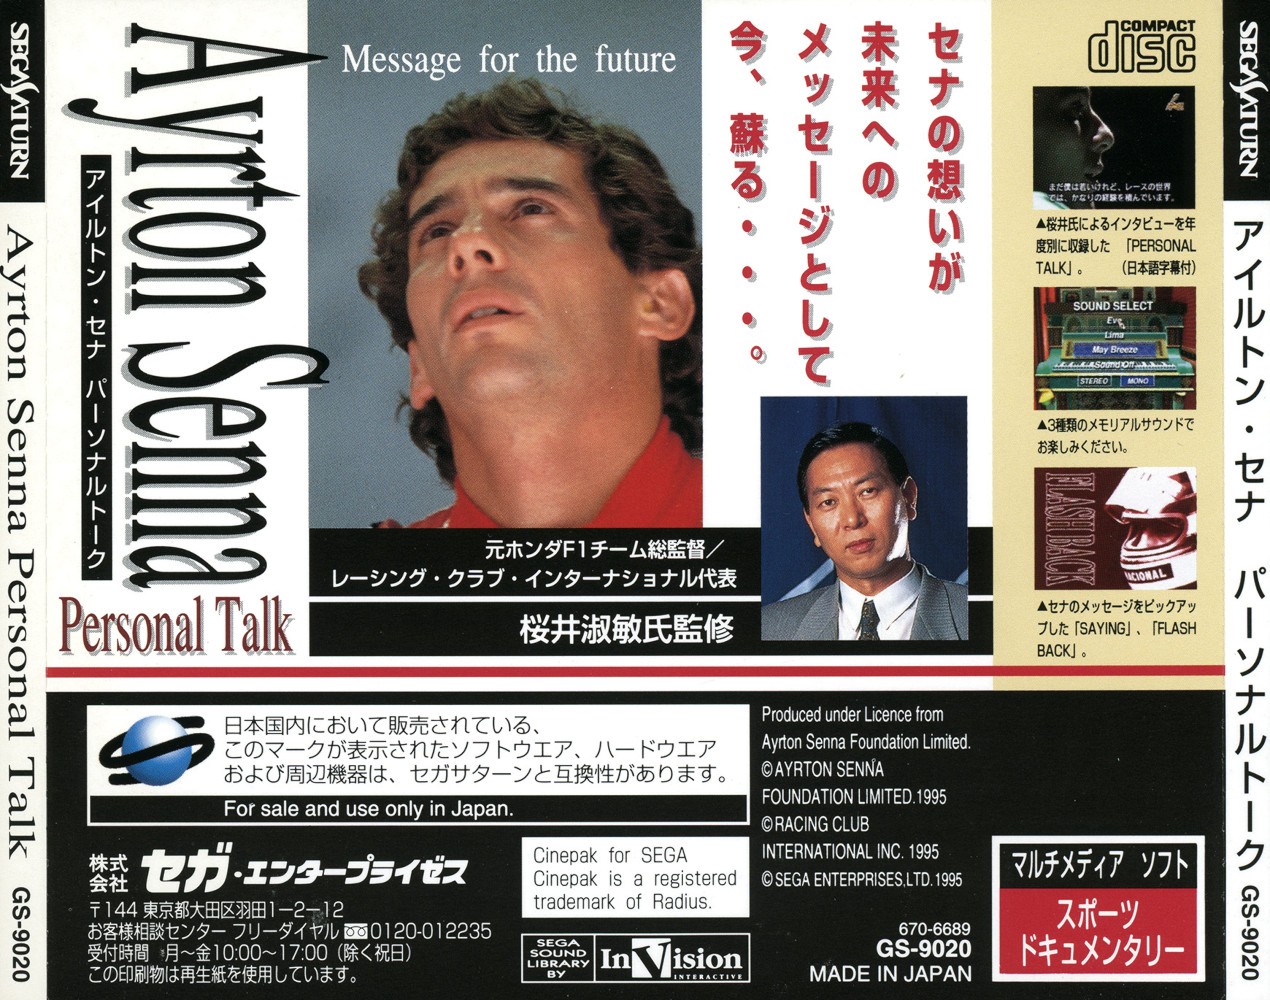 Ayrton Senna Personal Talk: Message for the future cover